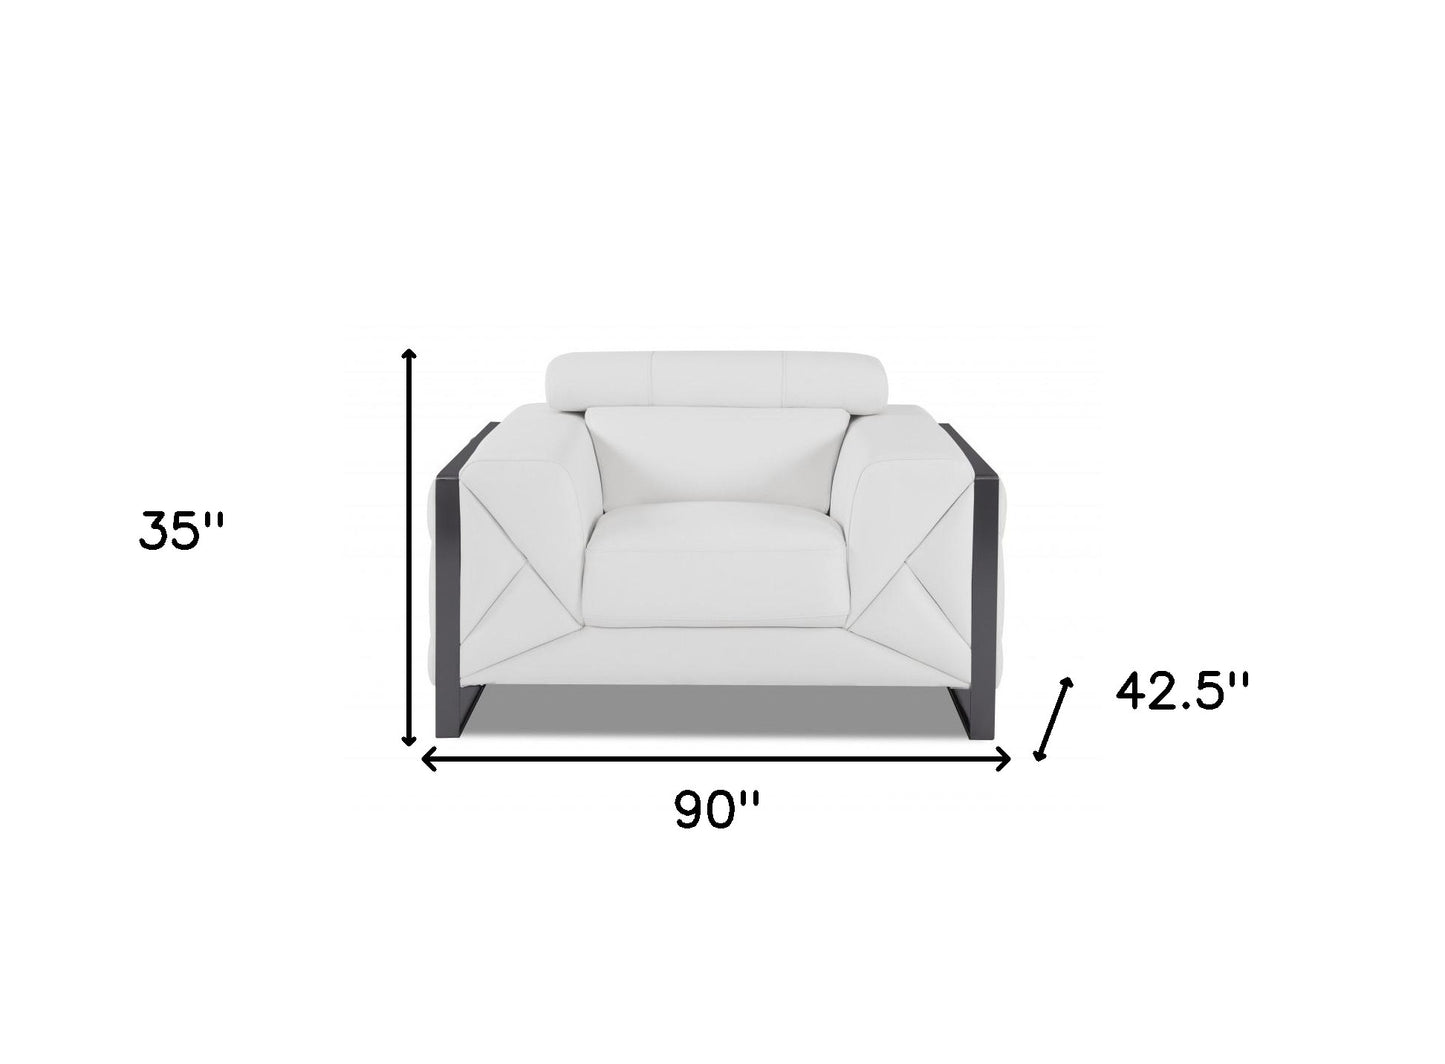 Three Piece White Italian Leather Six Person Seating Set By Homeroots